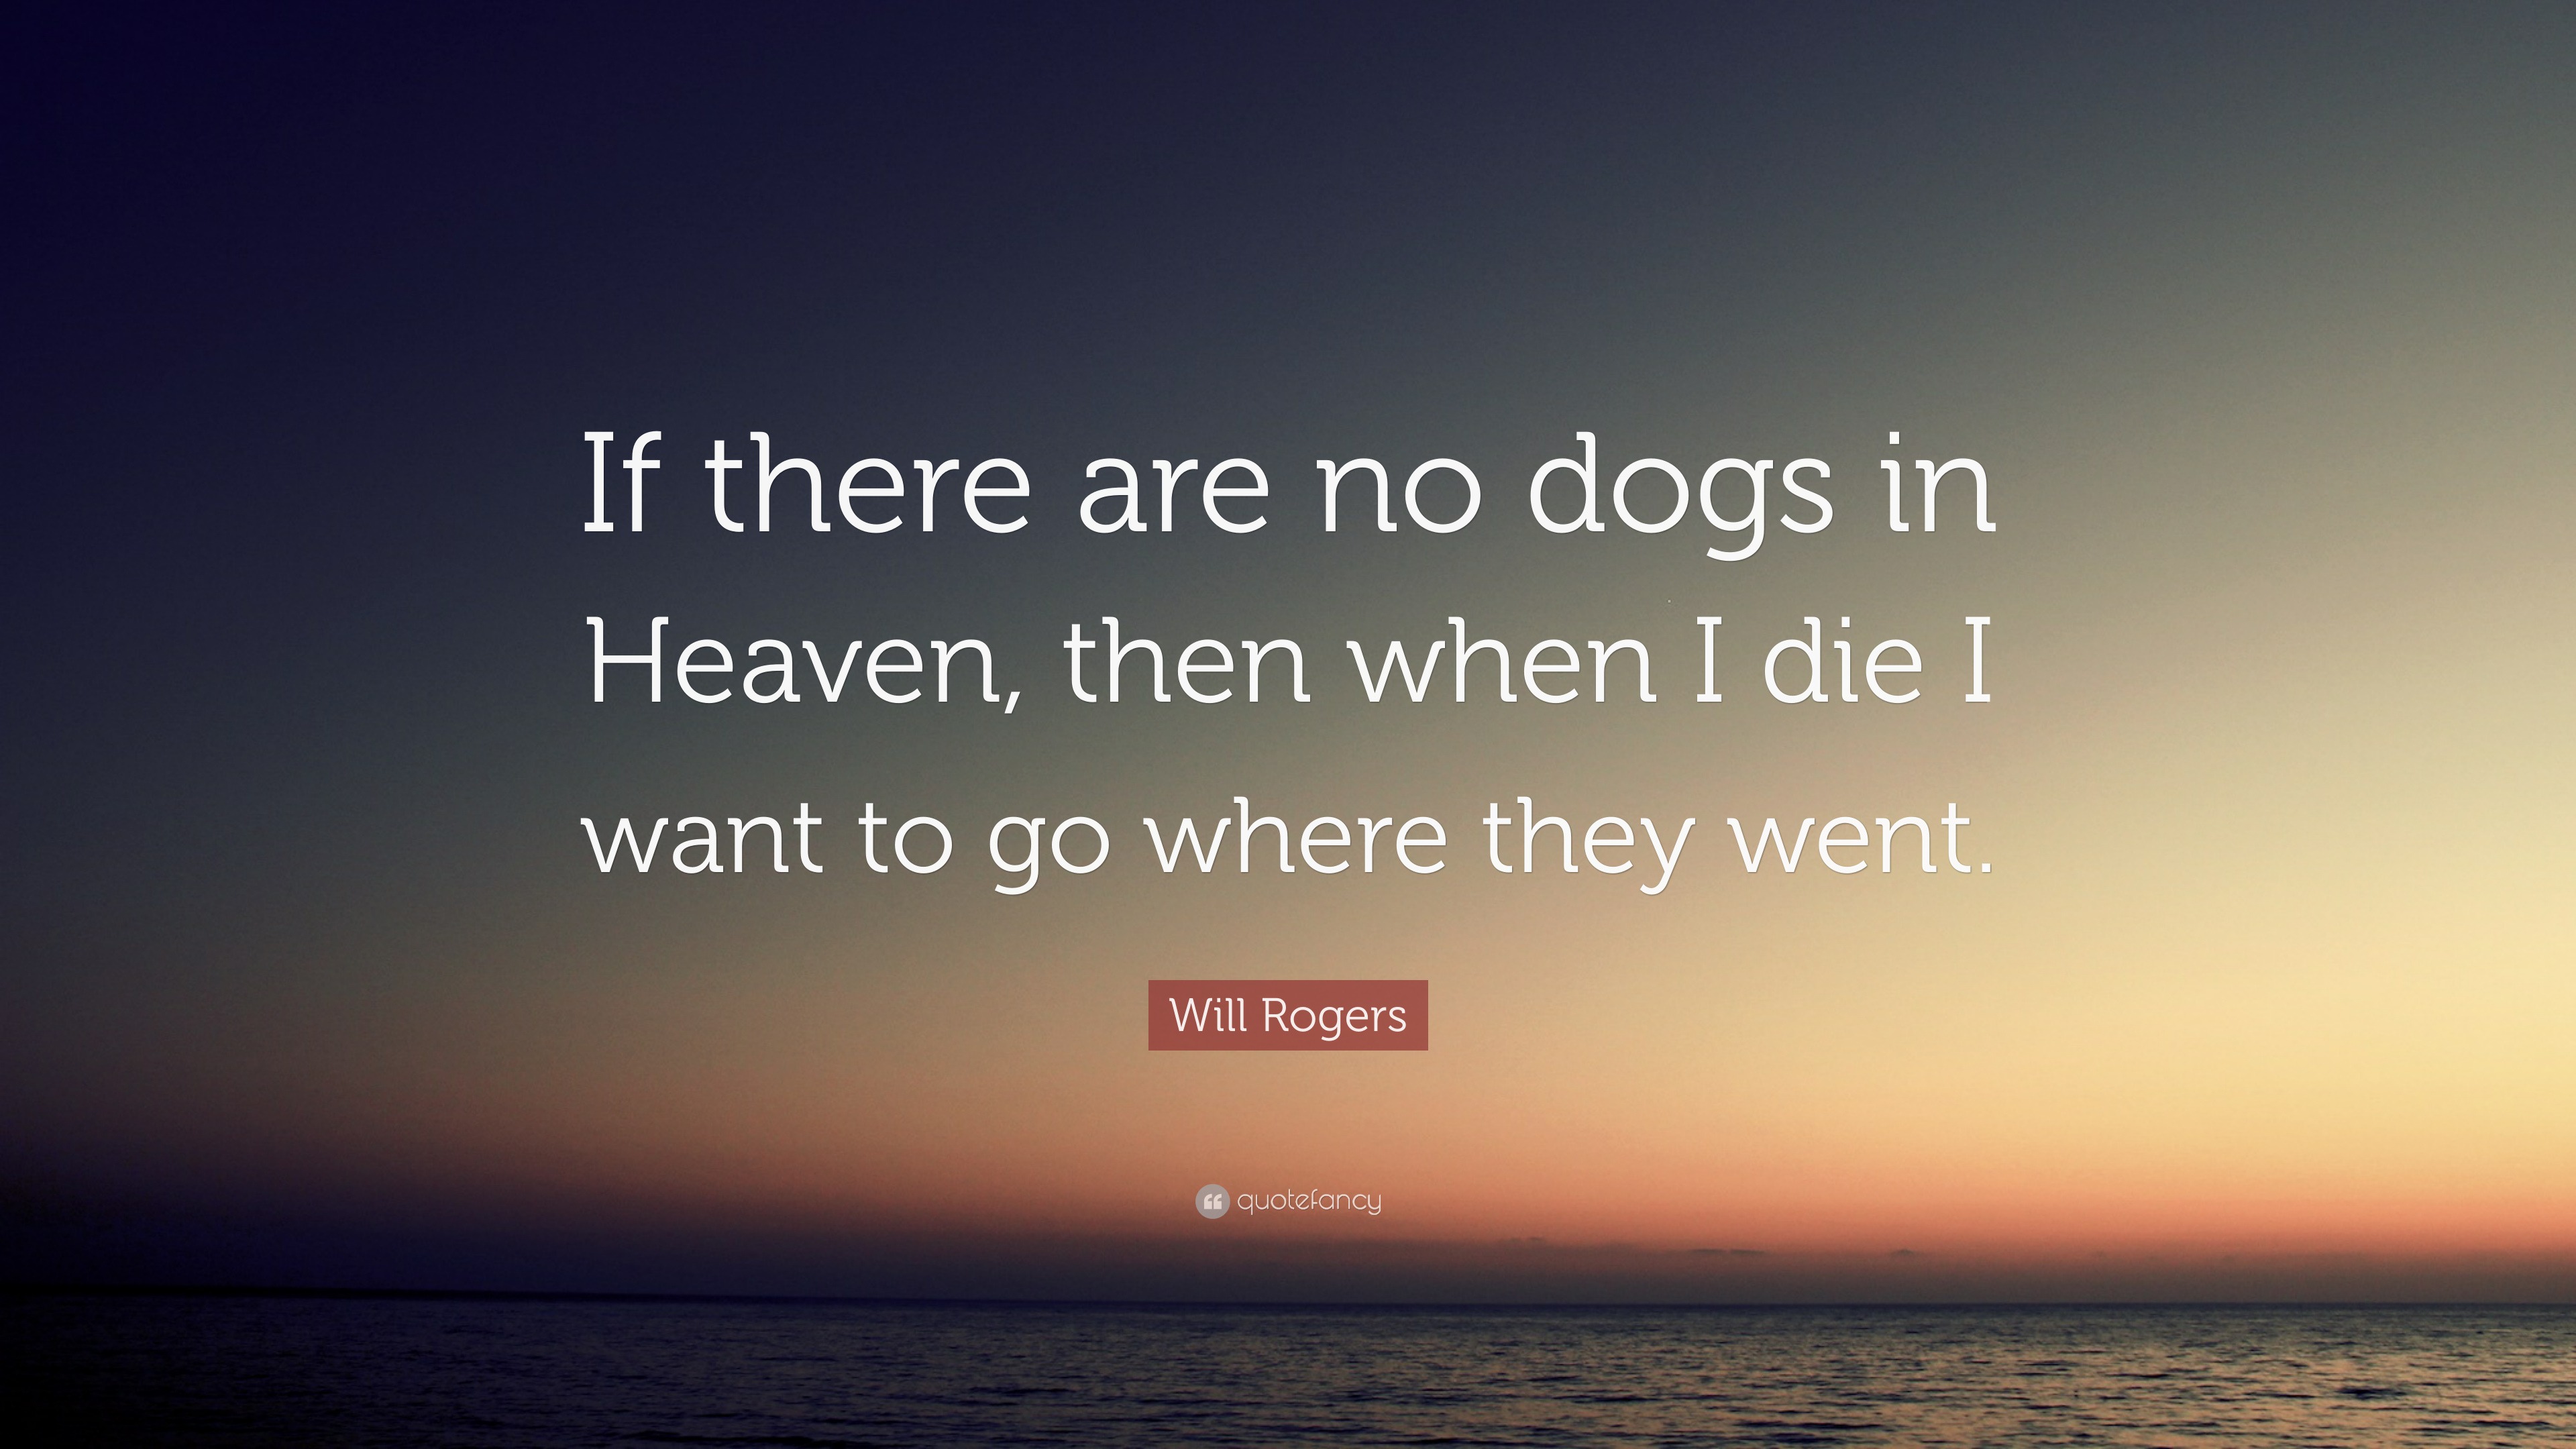 Will Rogers Quote: “If there are no dogs in Heaven, then when I die I